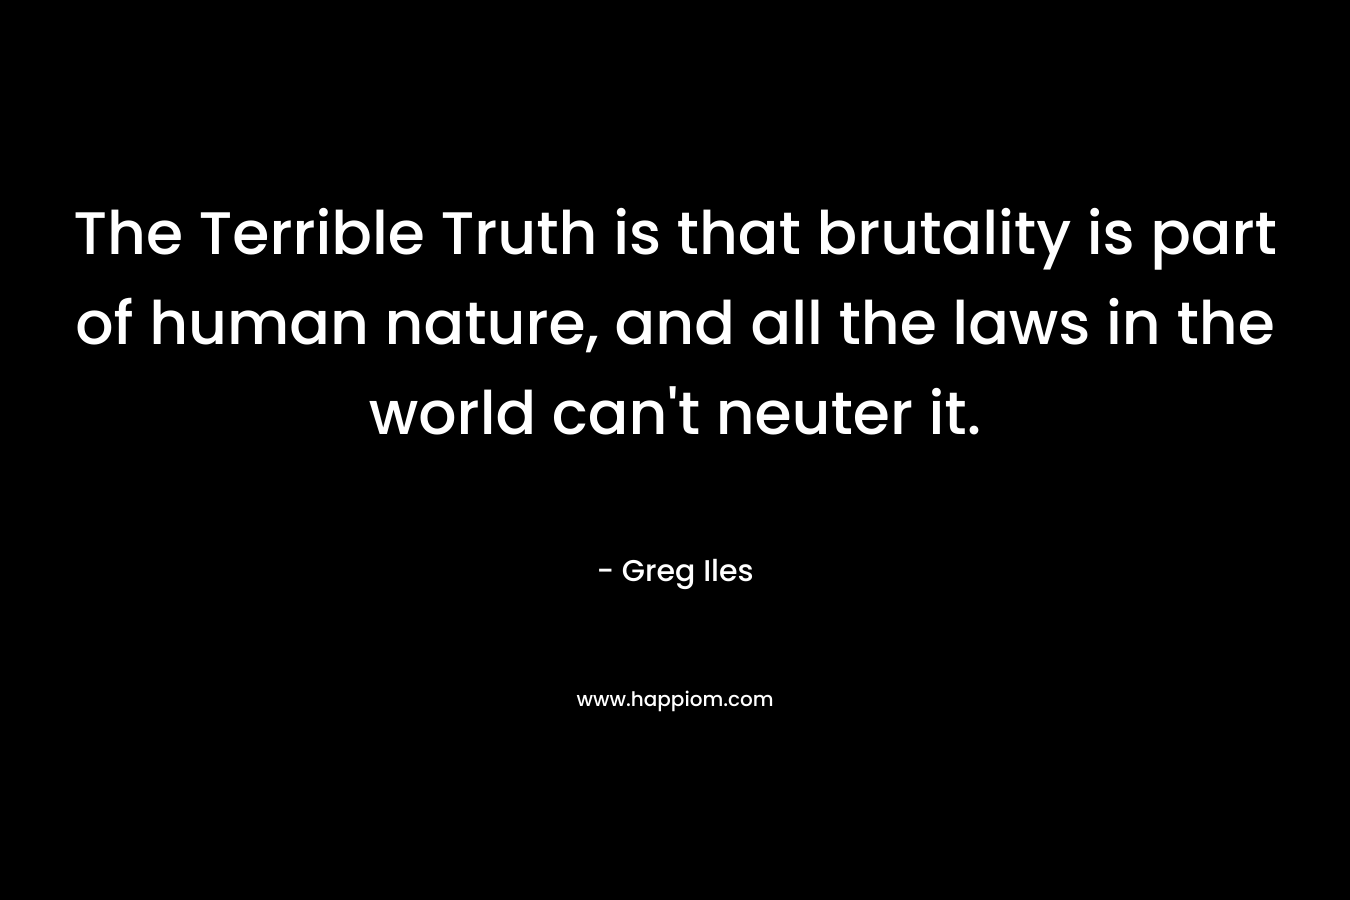 The Terrible Truth is that brutality is part of human nature, and all the laws in the world can’t neuter it. – Greg Iles